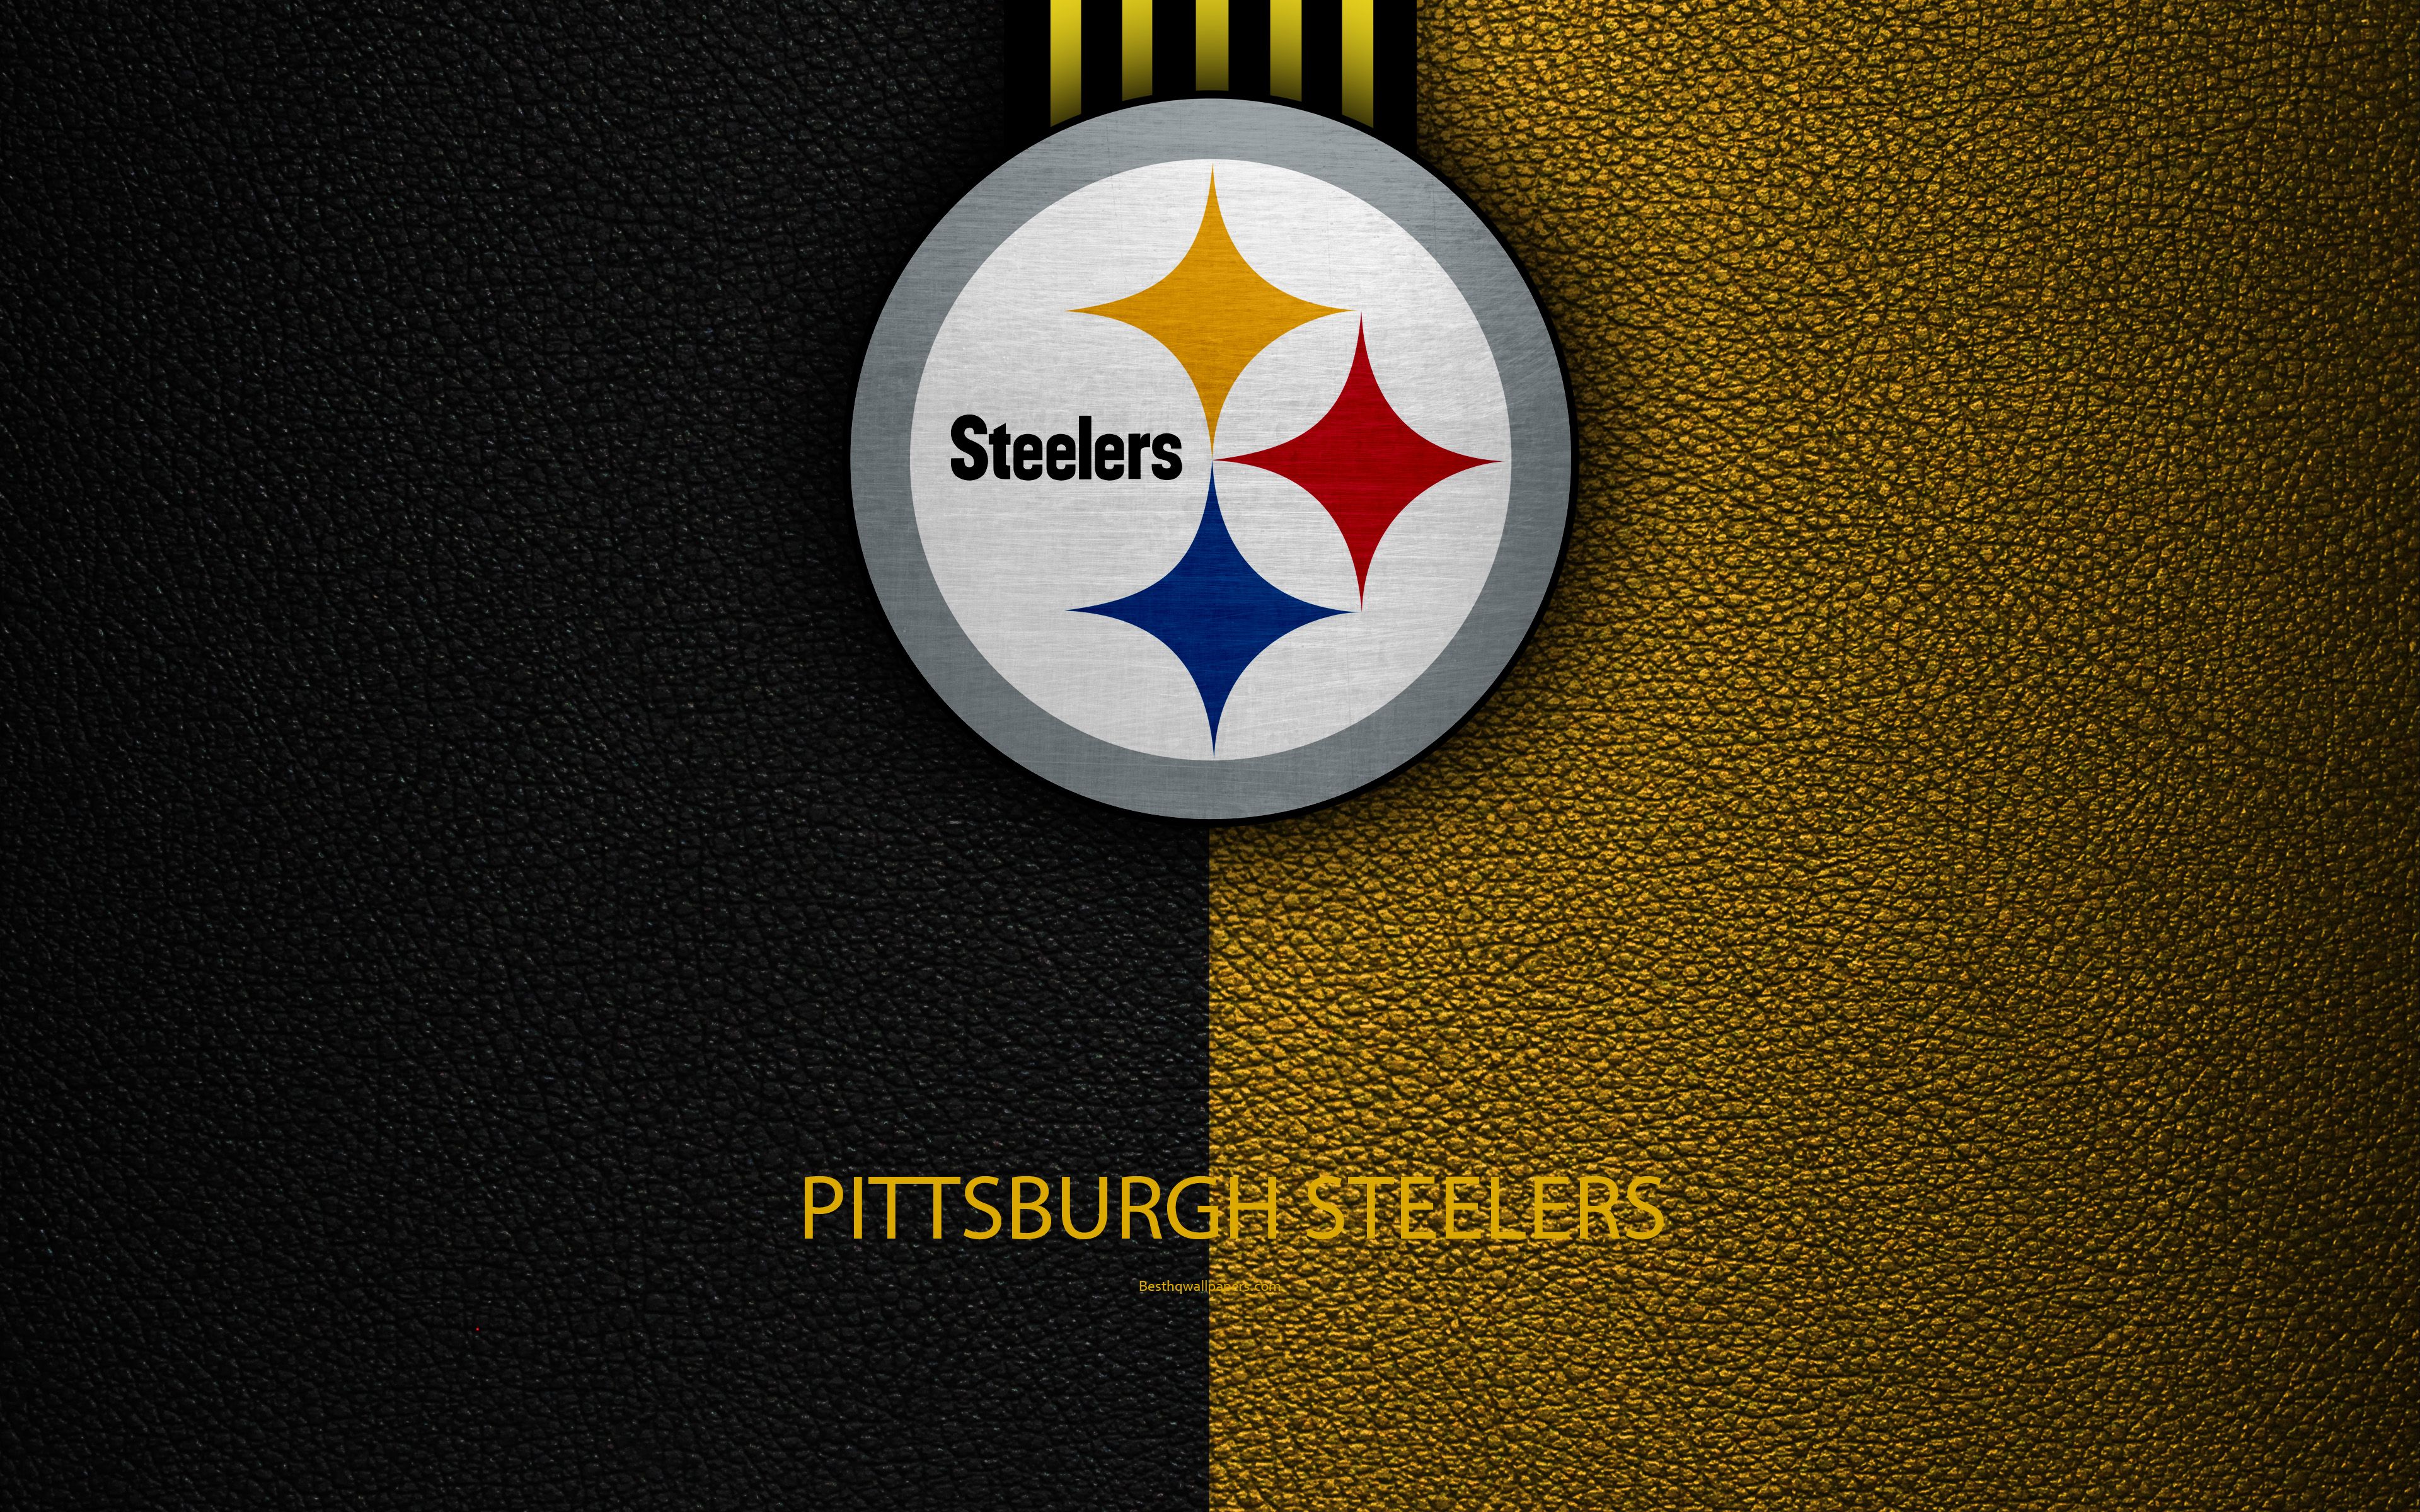 Download wallpaper Pittsburgh Steelers, 4K, American football, logo, leather texture, Pittsburgh, Pennsylvania, USA, emblem, NFL, National Football League, Northern Division for desktop with resolution 3840x2400. High Quality HD picture wallpaper